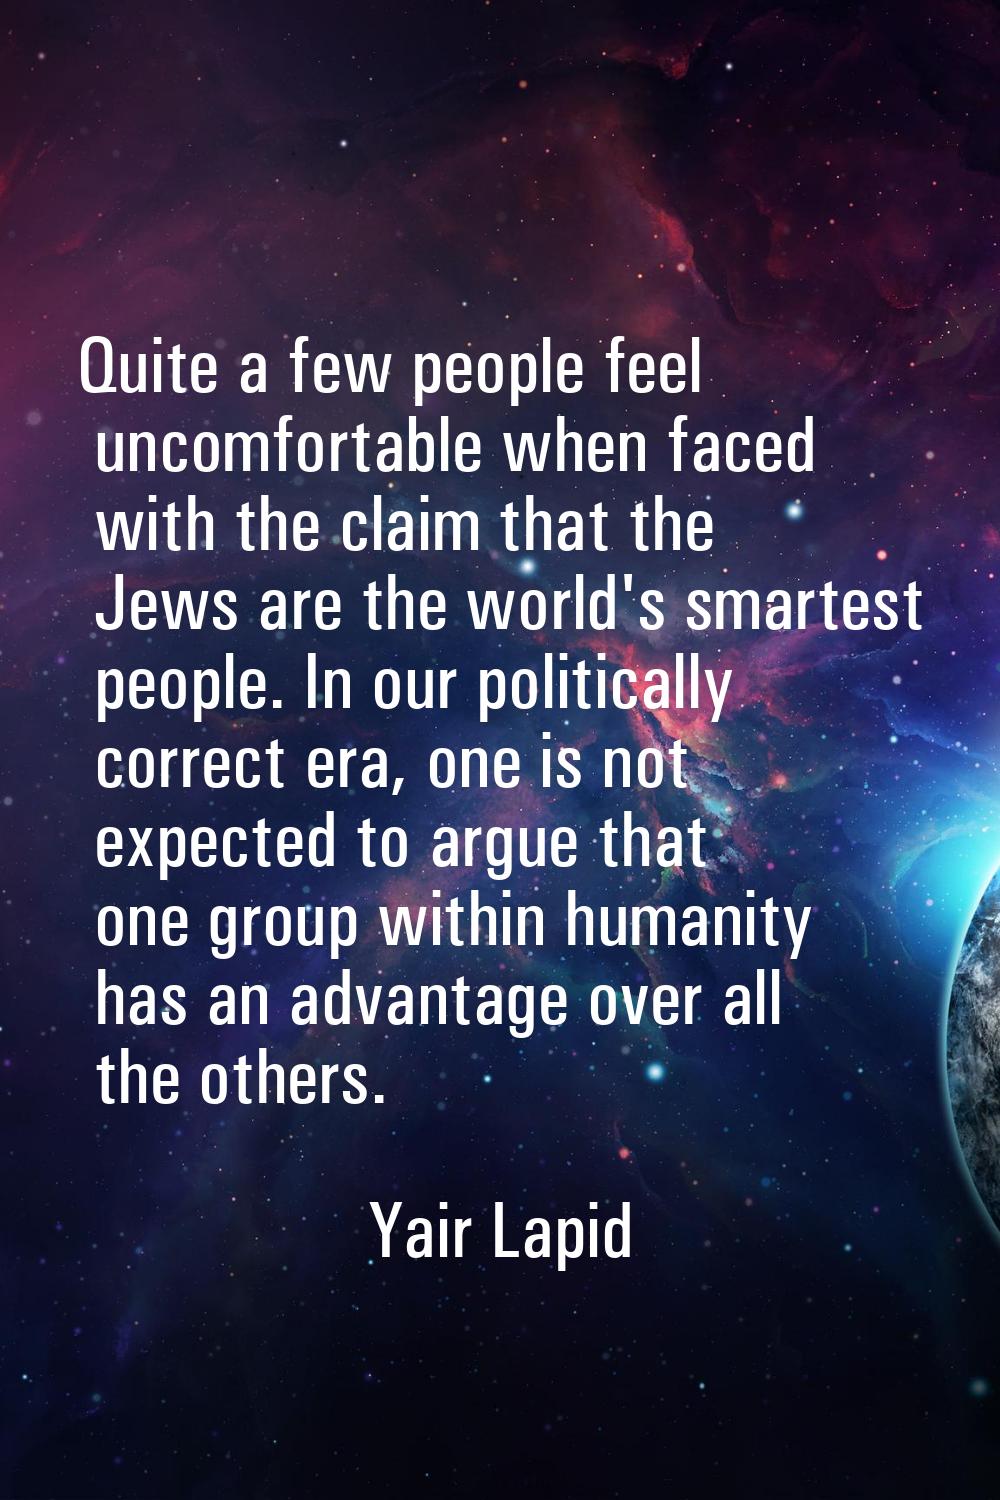 Quite a few people feel uncomfortable when faced with the claim that the Jews are the world's smart